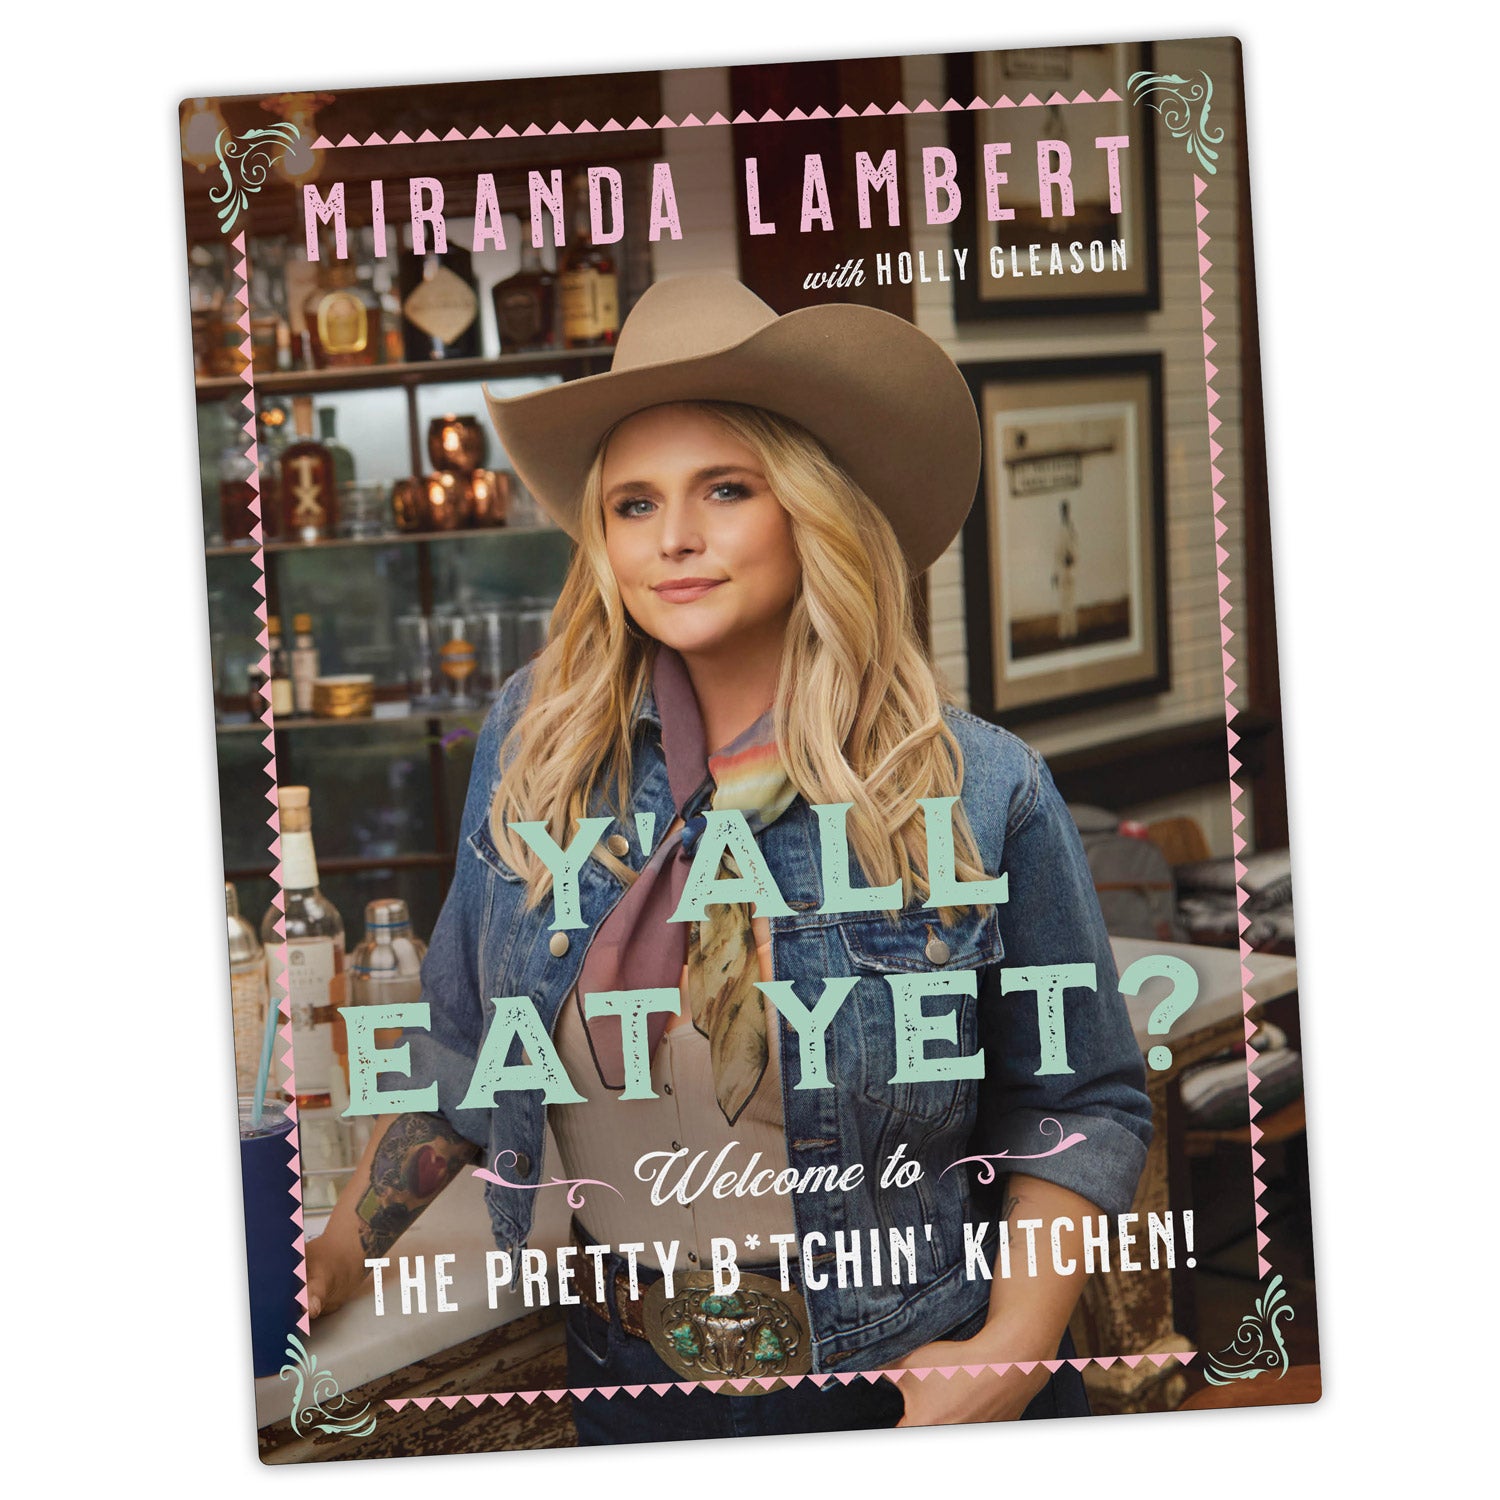 Cover features an image of Miranda with the text, "Y'all Eat Yet? Welcome to the Pretty B*tchin' Kitchen. By Miranda Lambert with Holly Gleason."